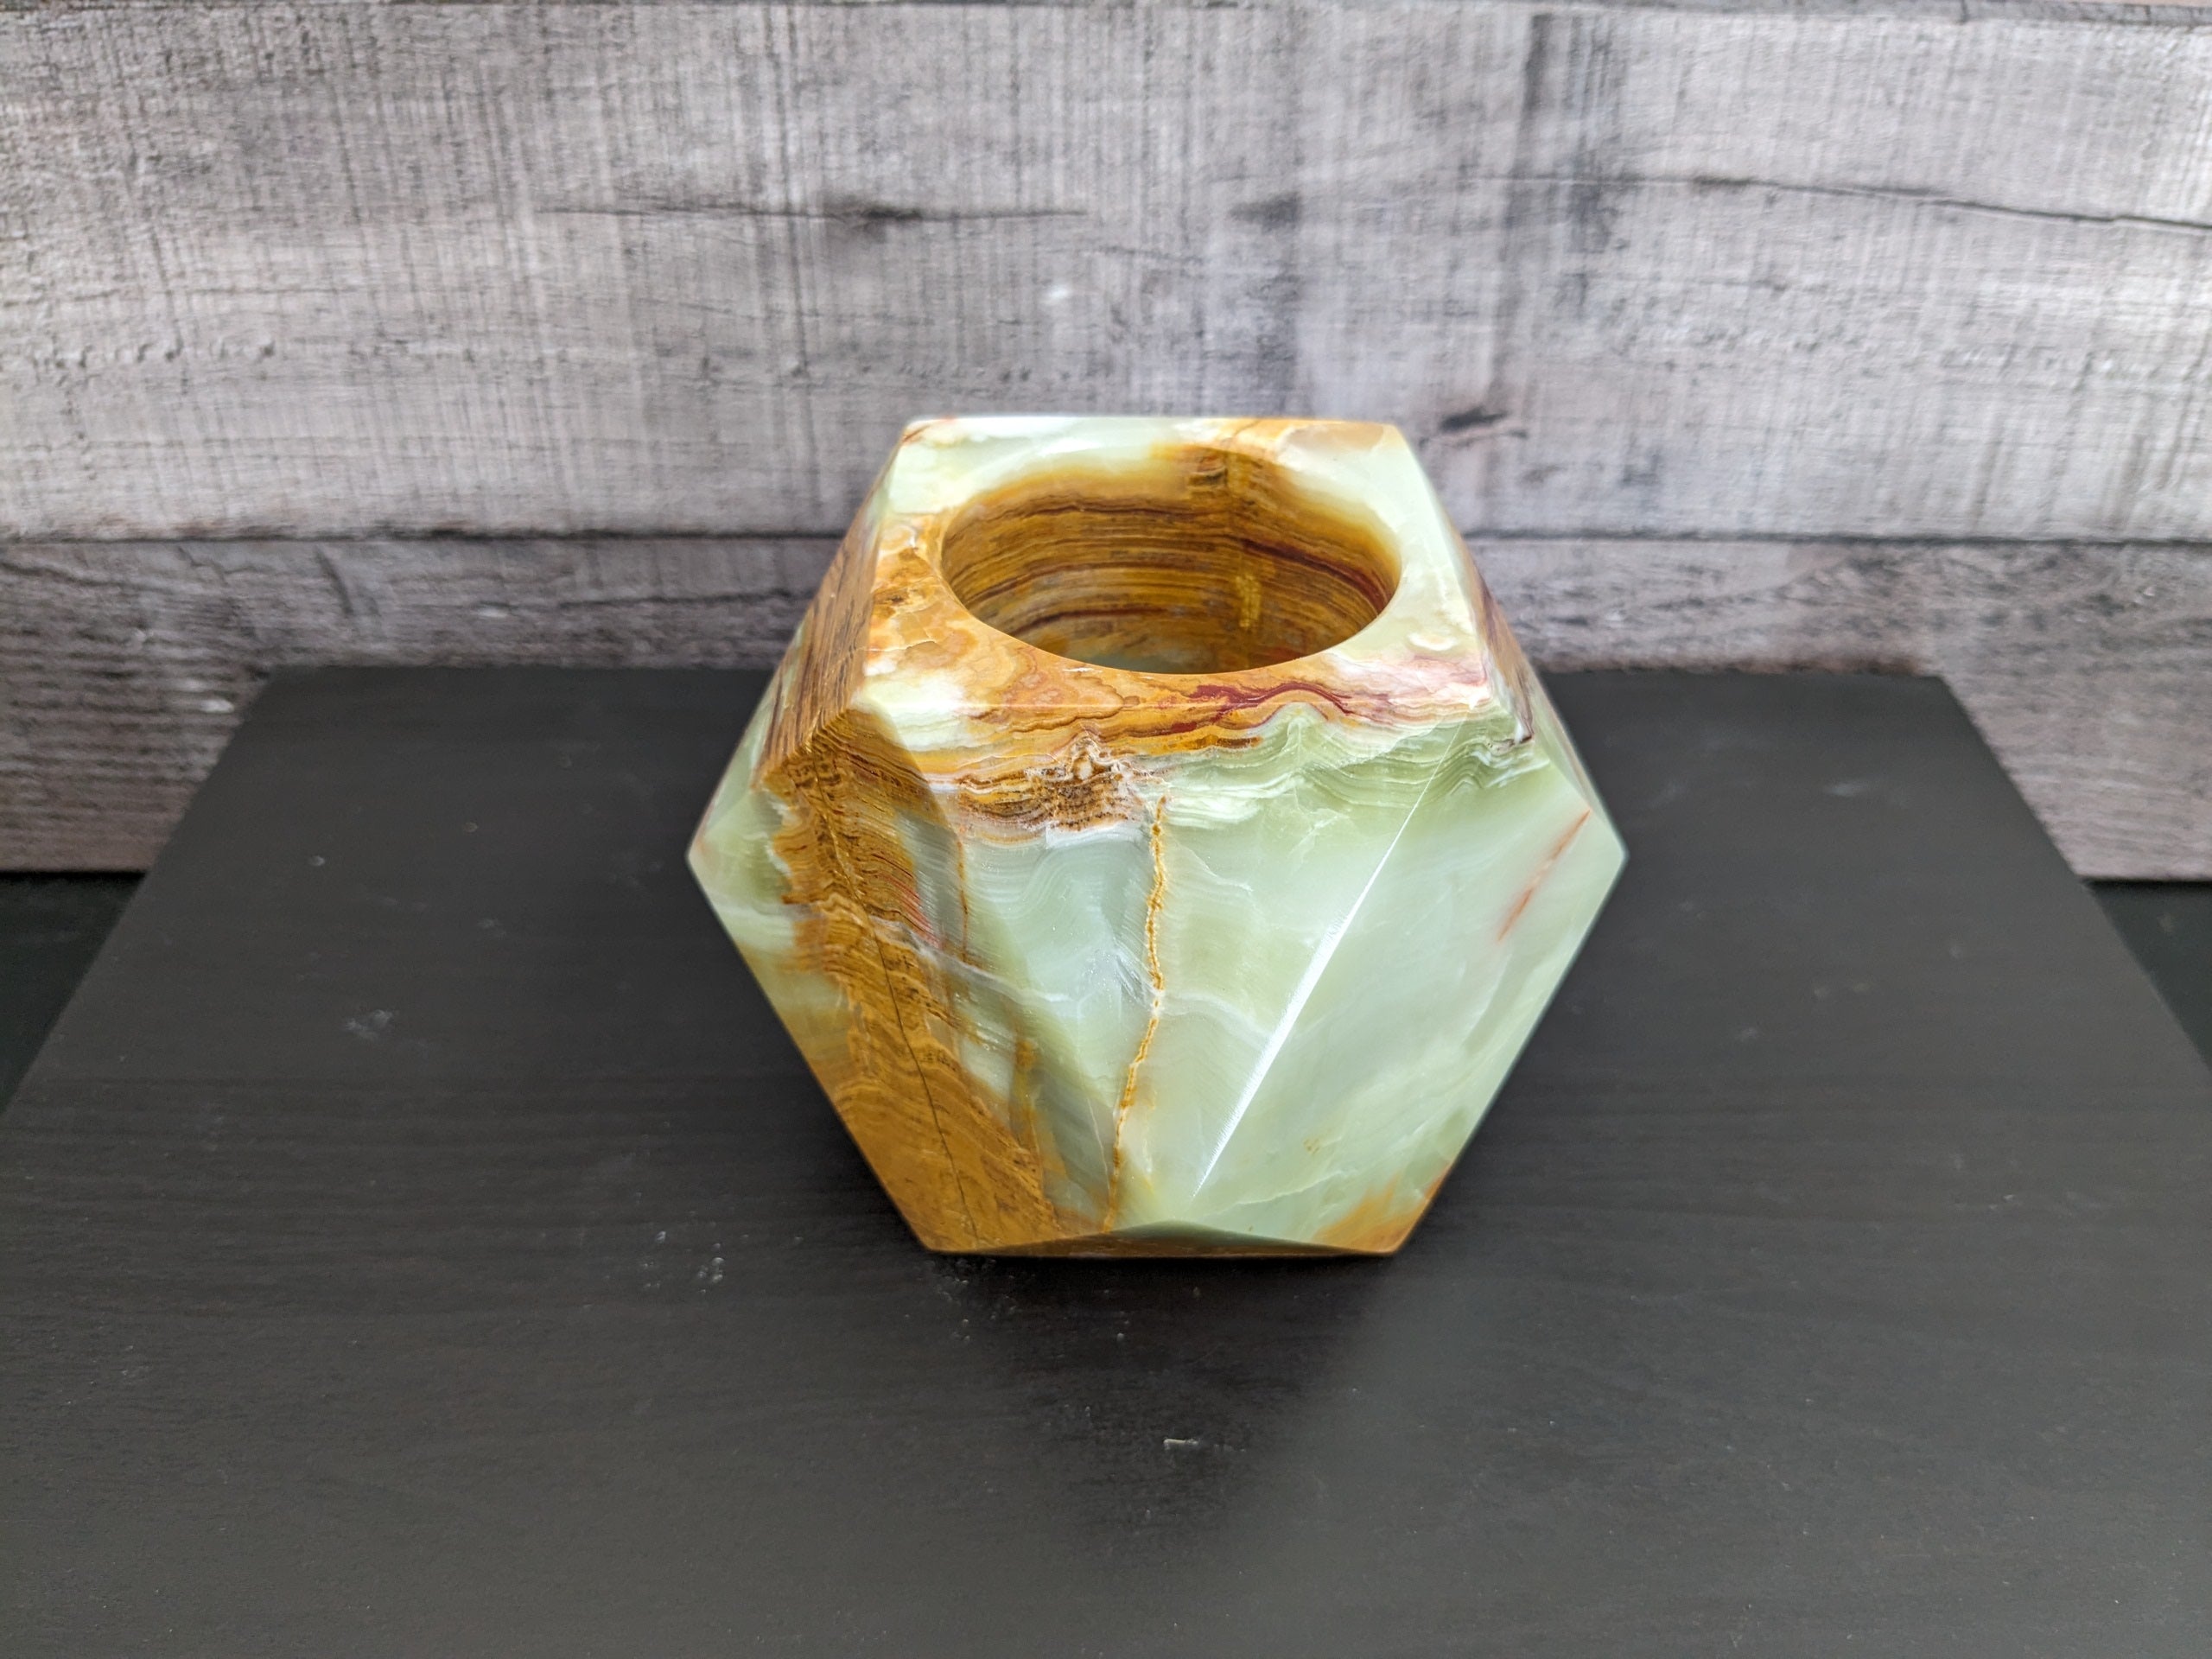 Green Onyx Stone Mini Succulent Planter and Pot Holder. Handmade in Mexico. We package and ship from the USA. Buy now at www.felipeandgrace.com. 